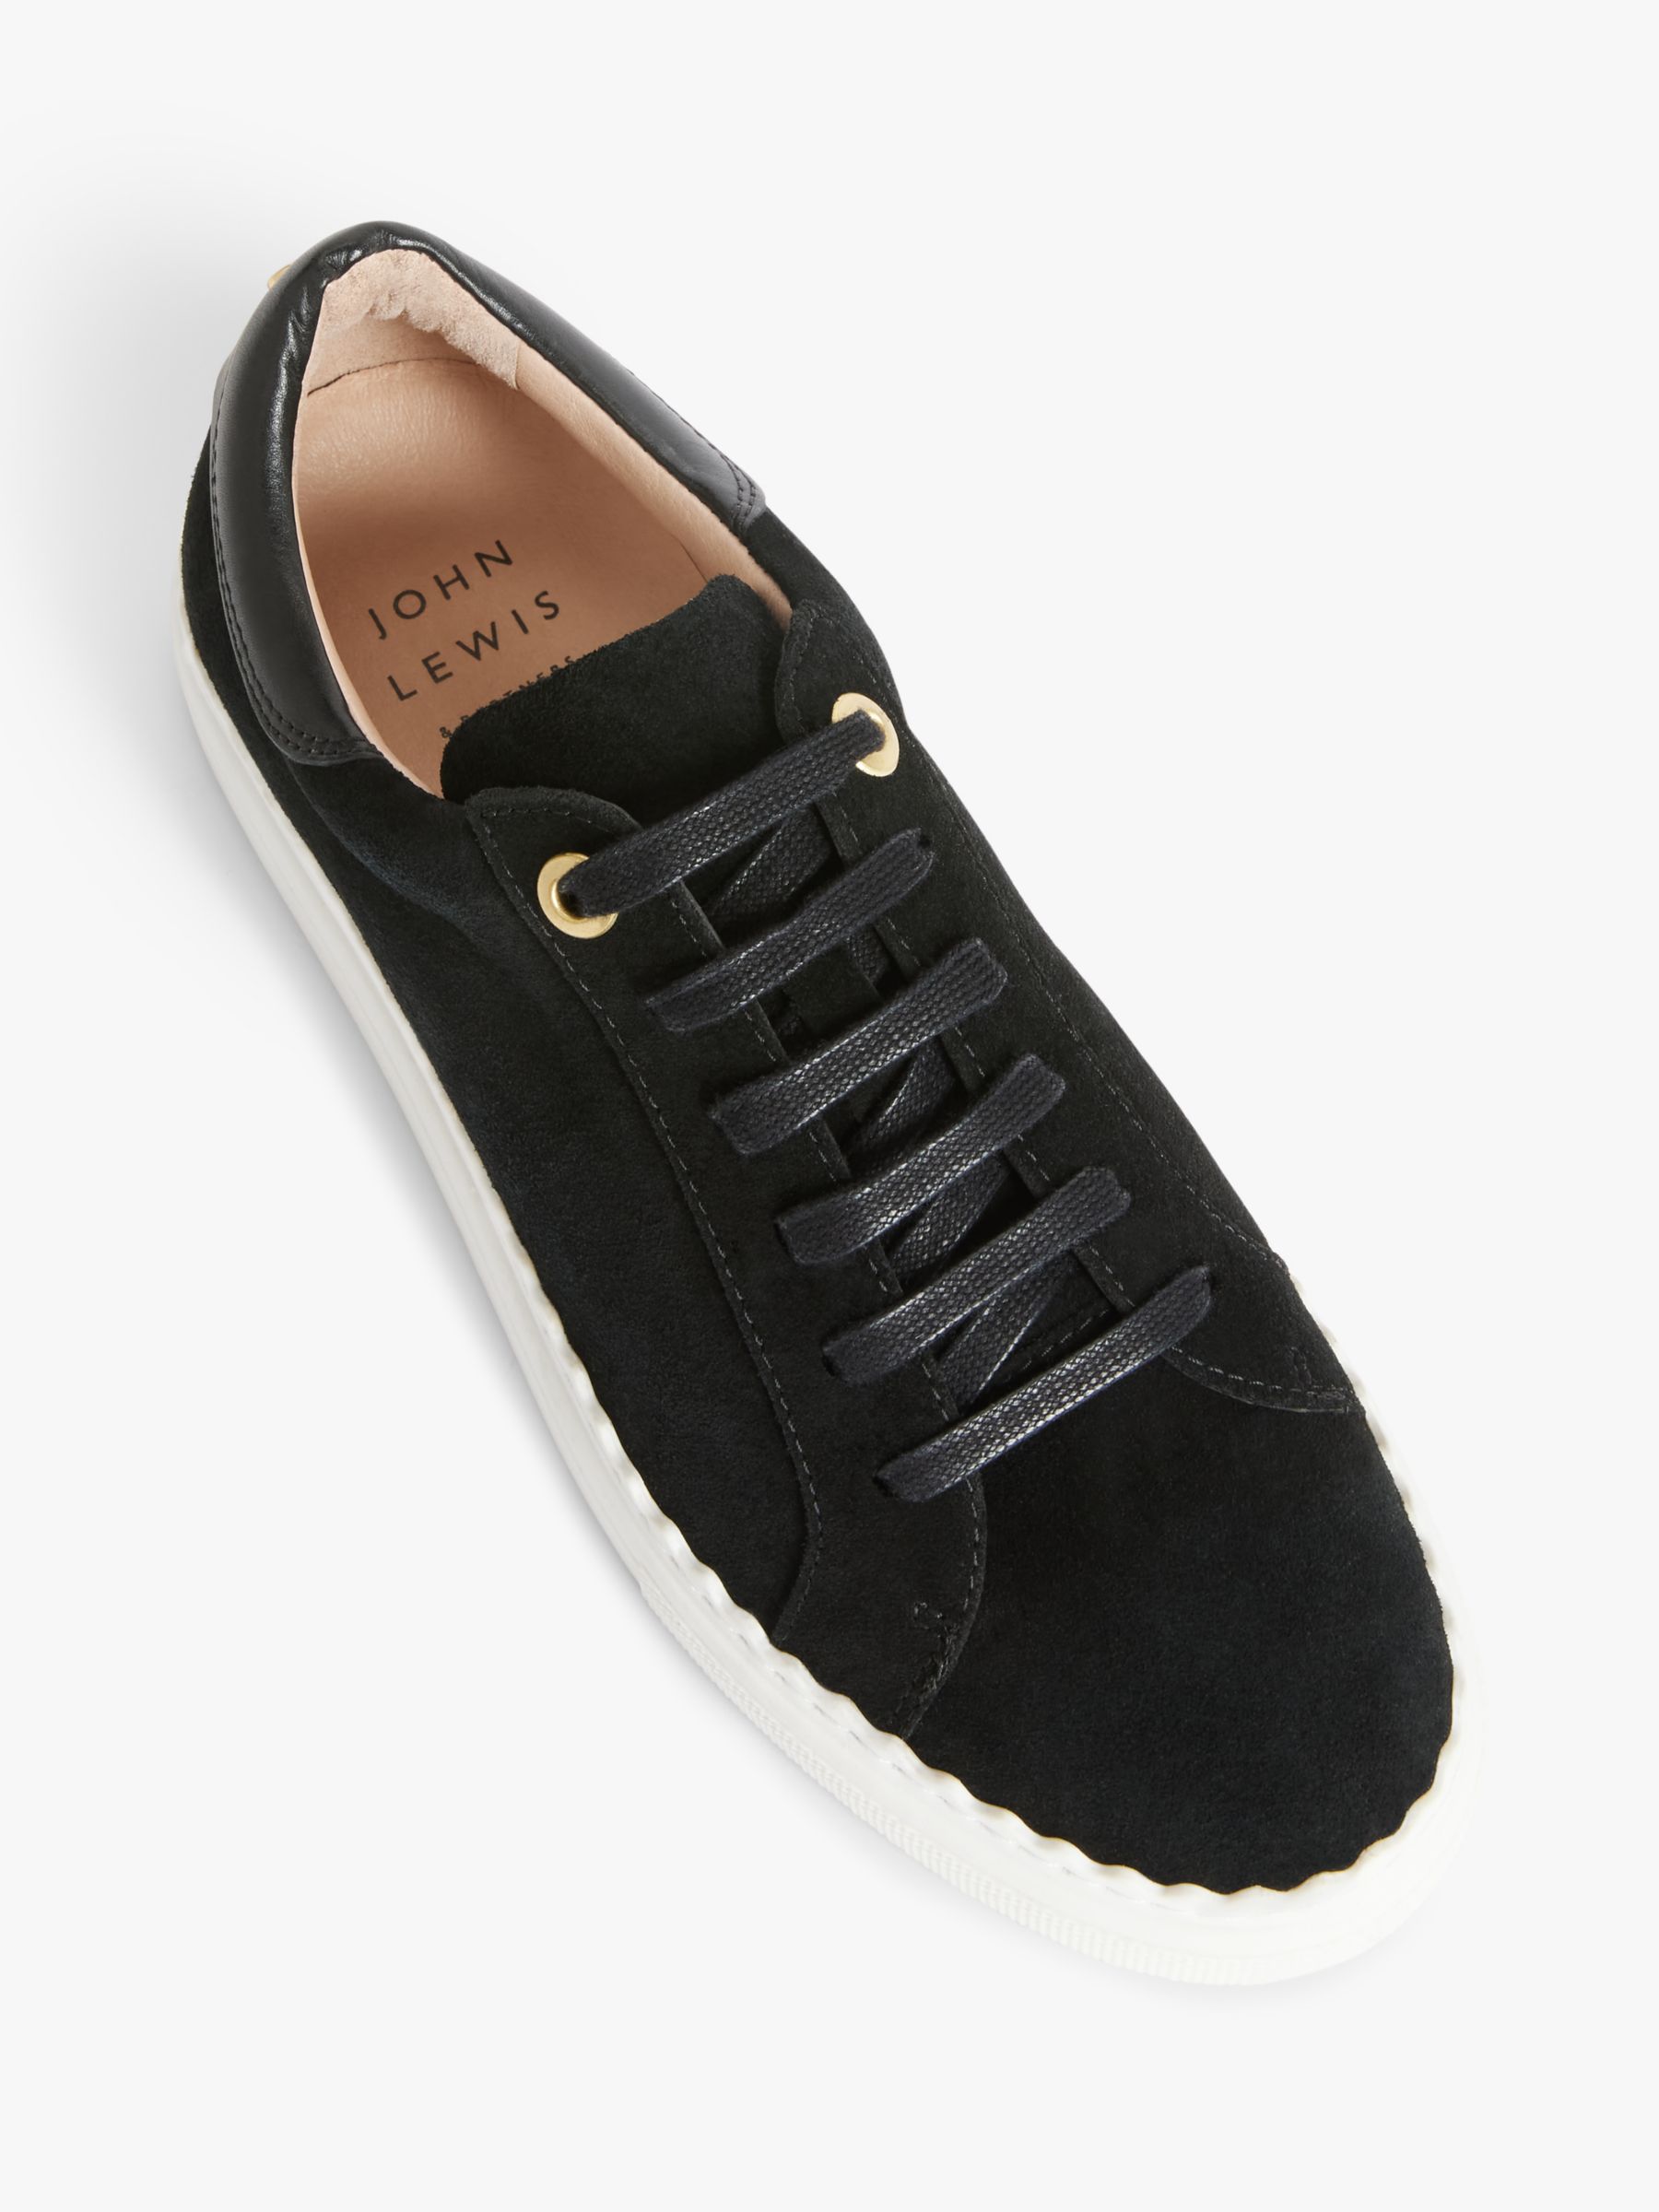 John Lewis Fiona Scalloped Detail Suede Trainers, Black at John Lewis ...